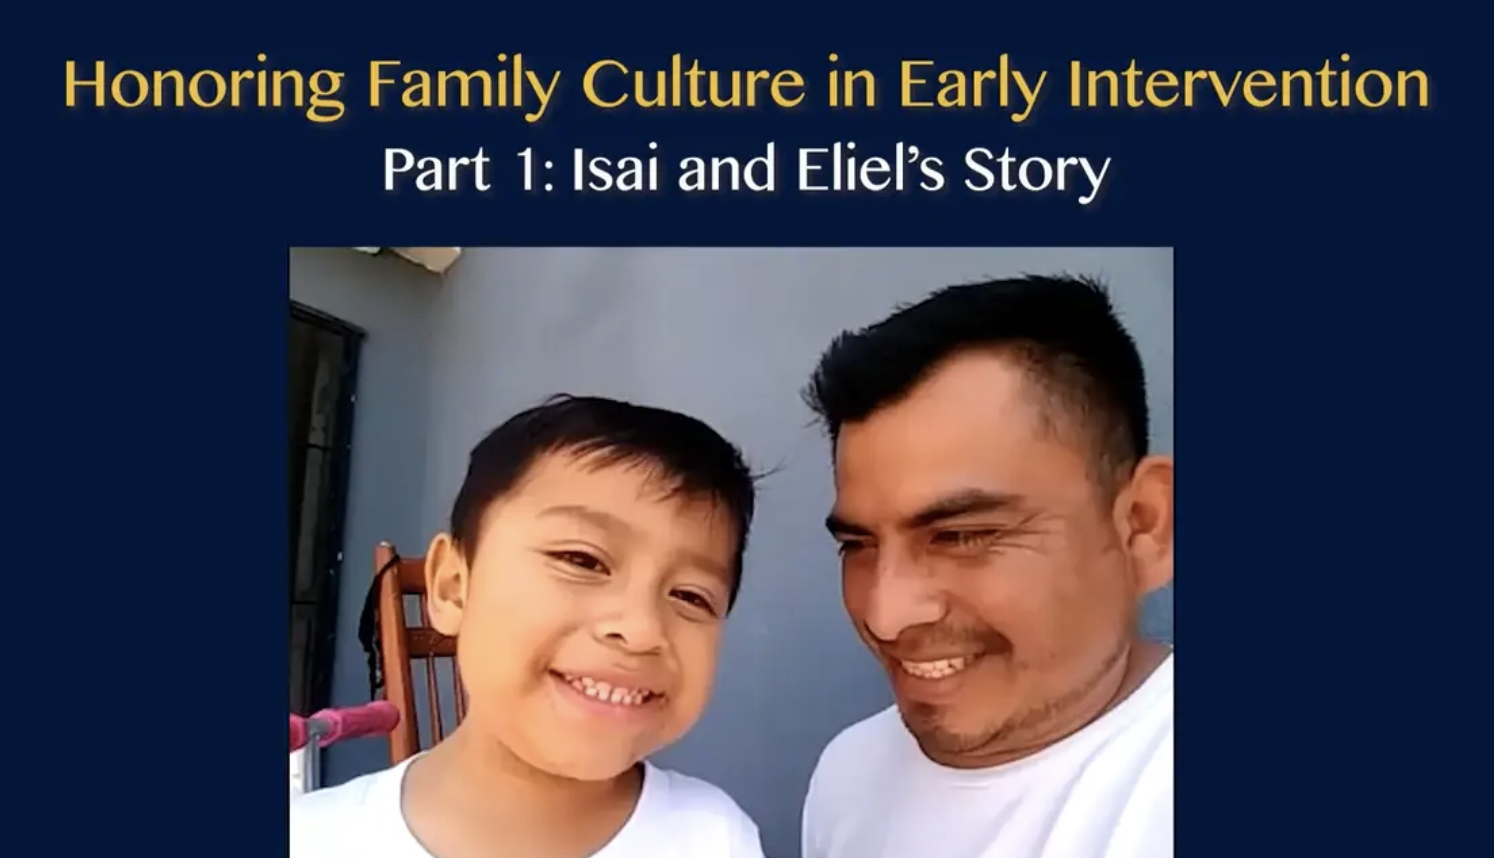 Honoring Family Culture in Early Intervention - Part 1: Isai and Eliel's Story